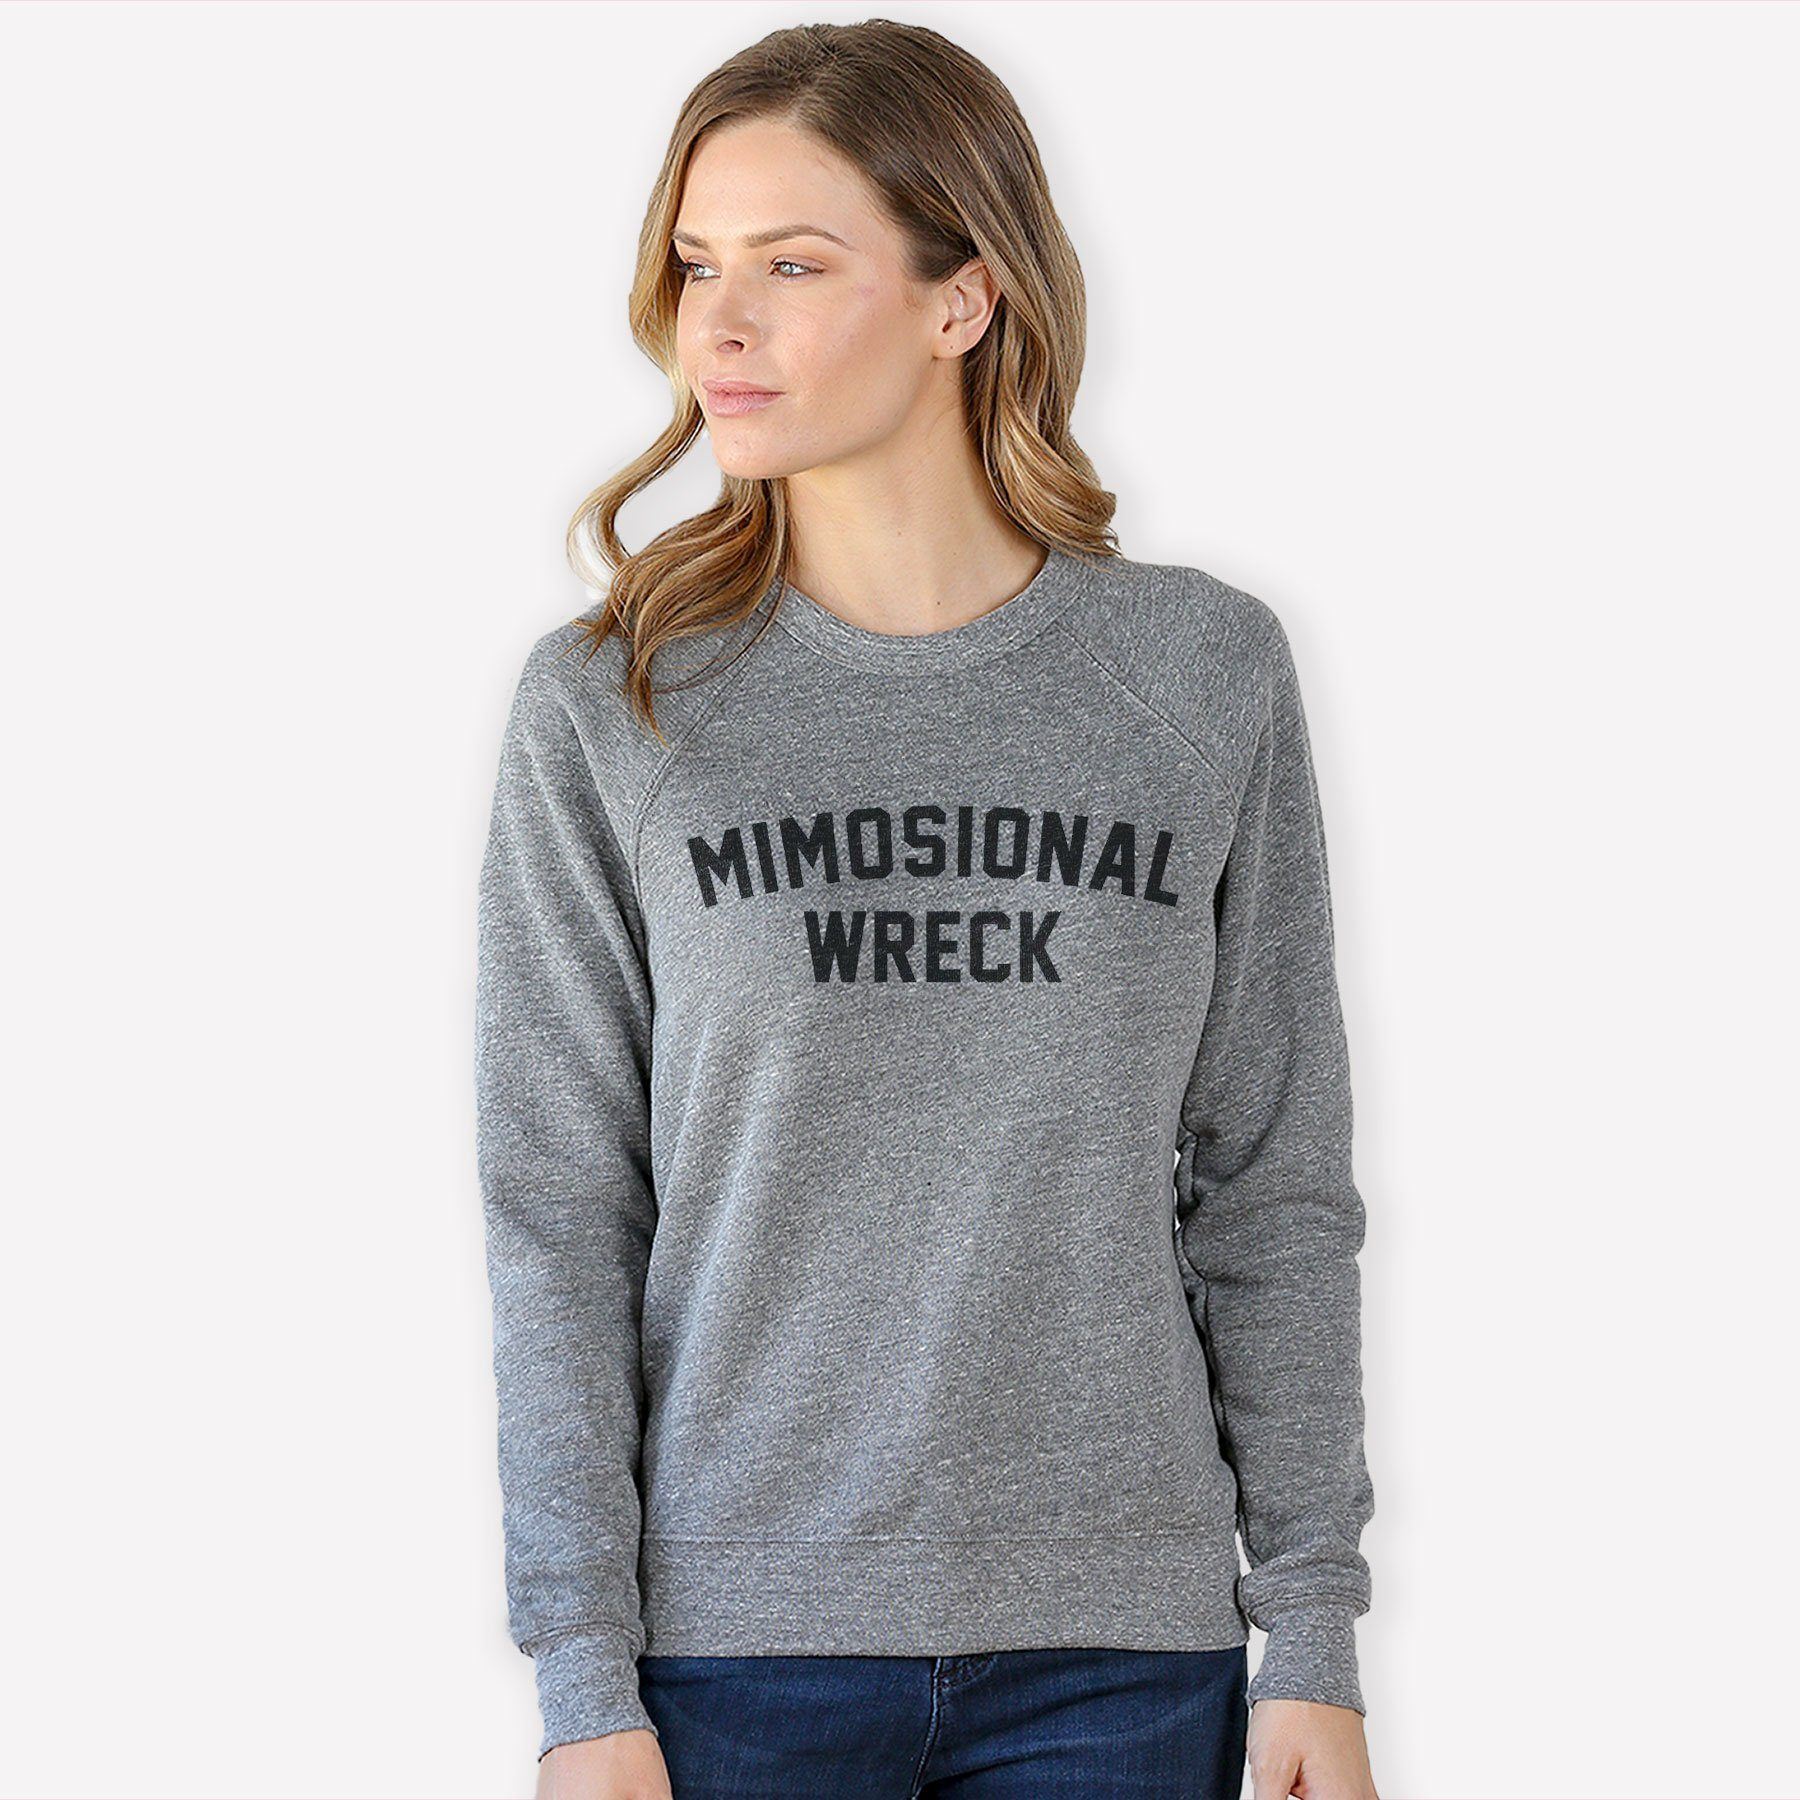 Mimosional Wreck Lifestyle The Home T